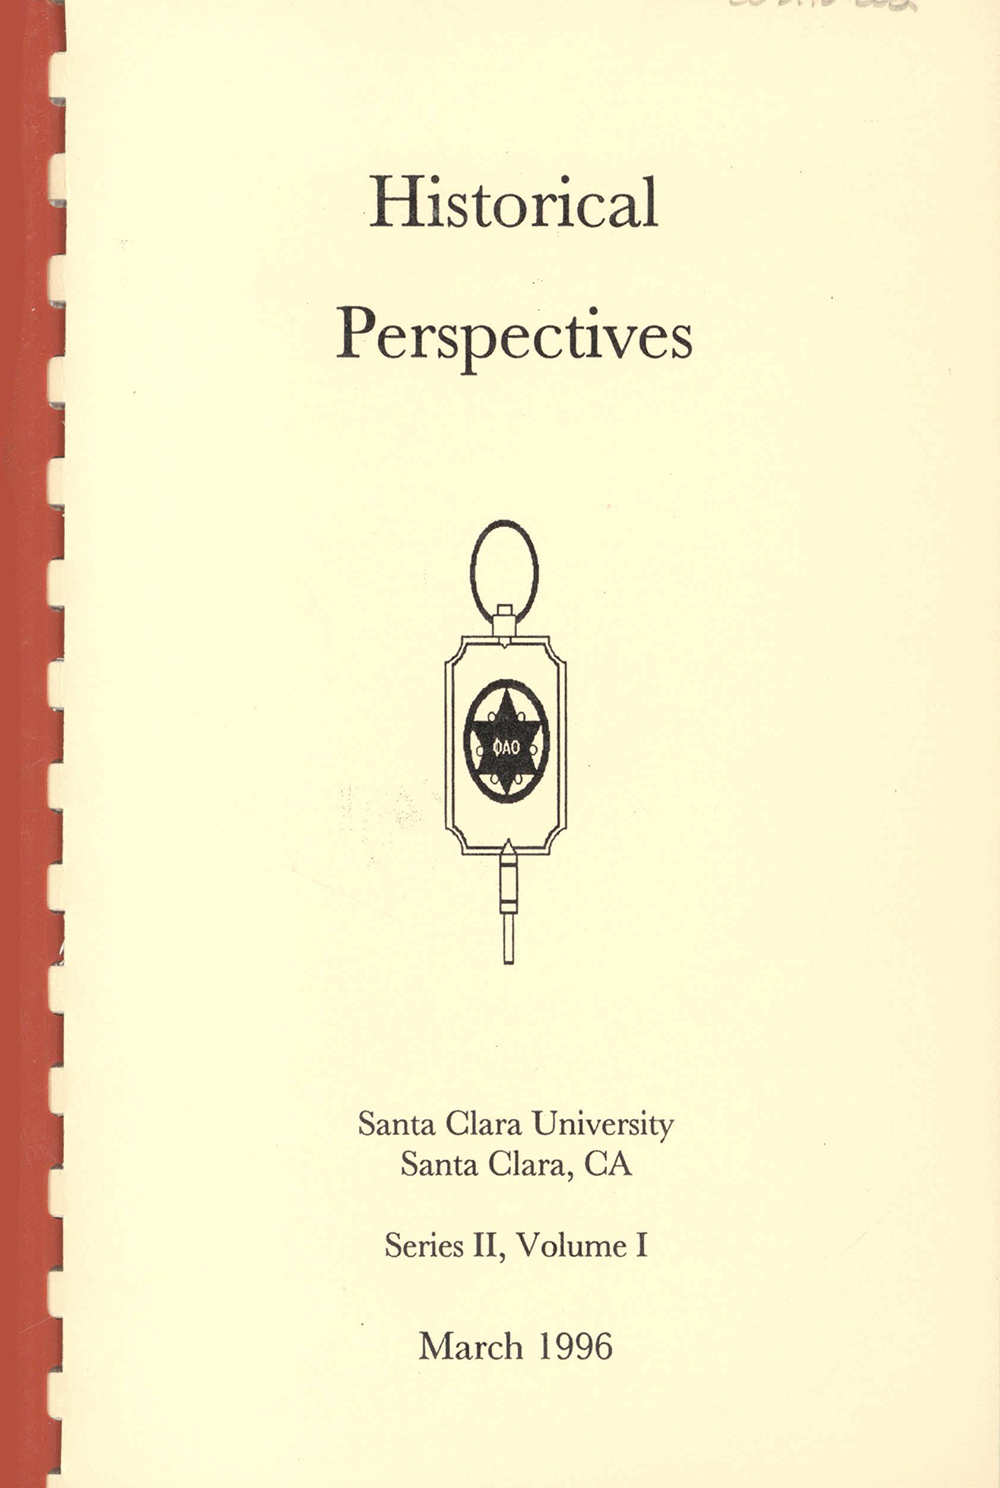 Historical Perspectives 1996, volume 1